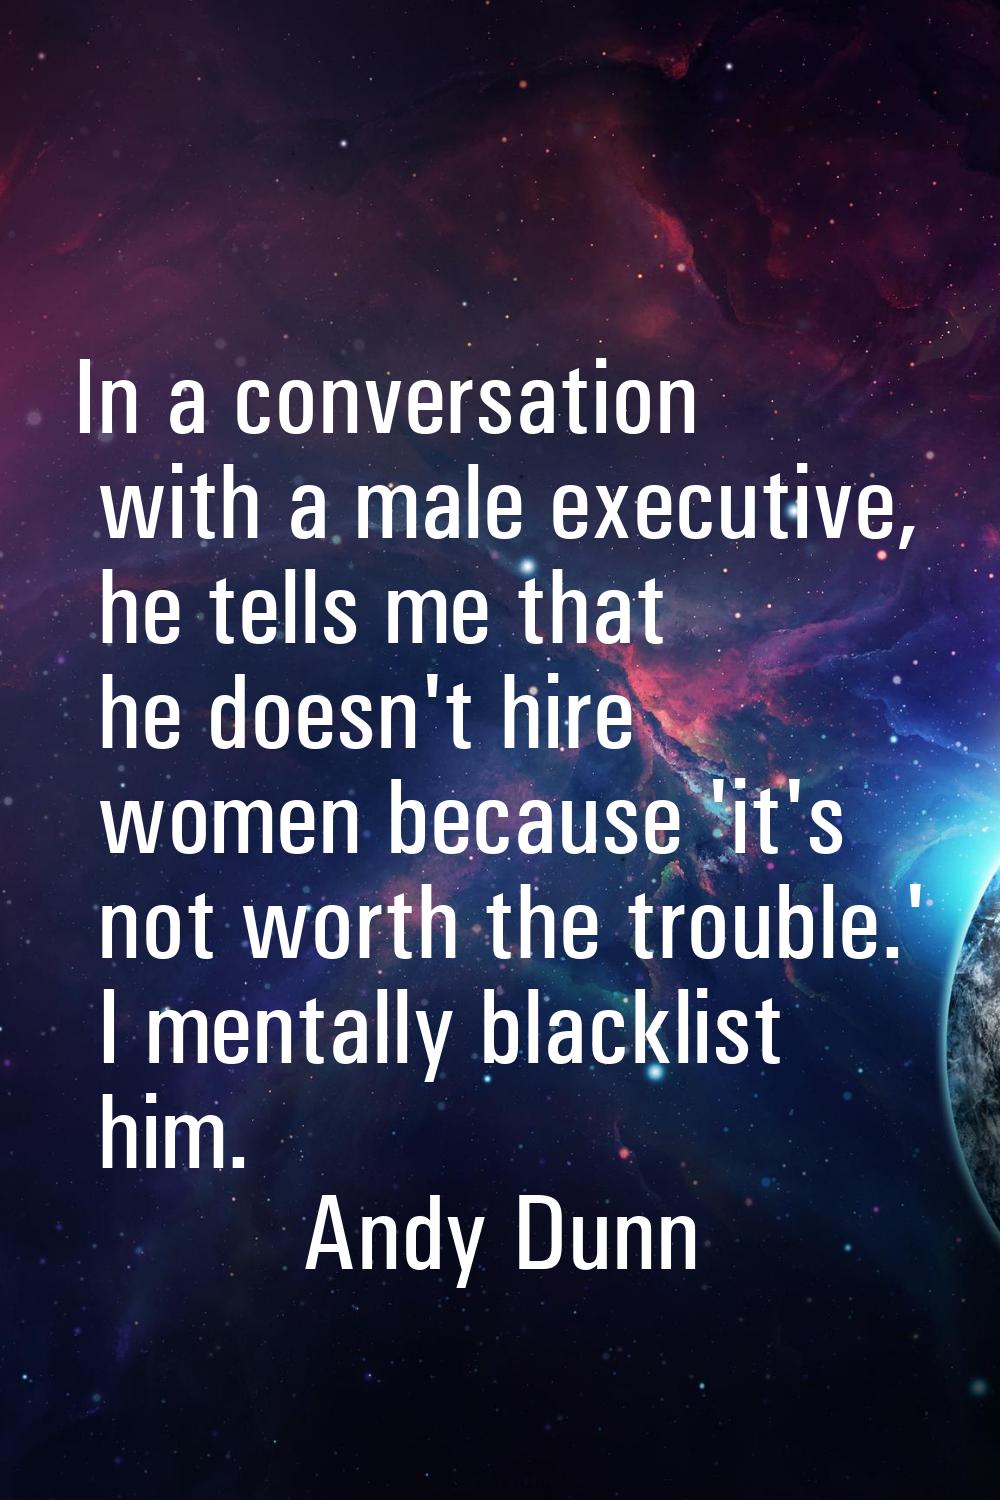 In a conversation with a male executive, he tells me that he doesn't hire women because 'it's not w